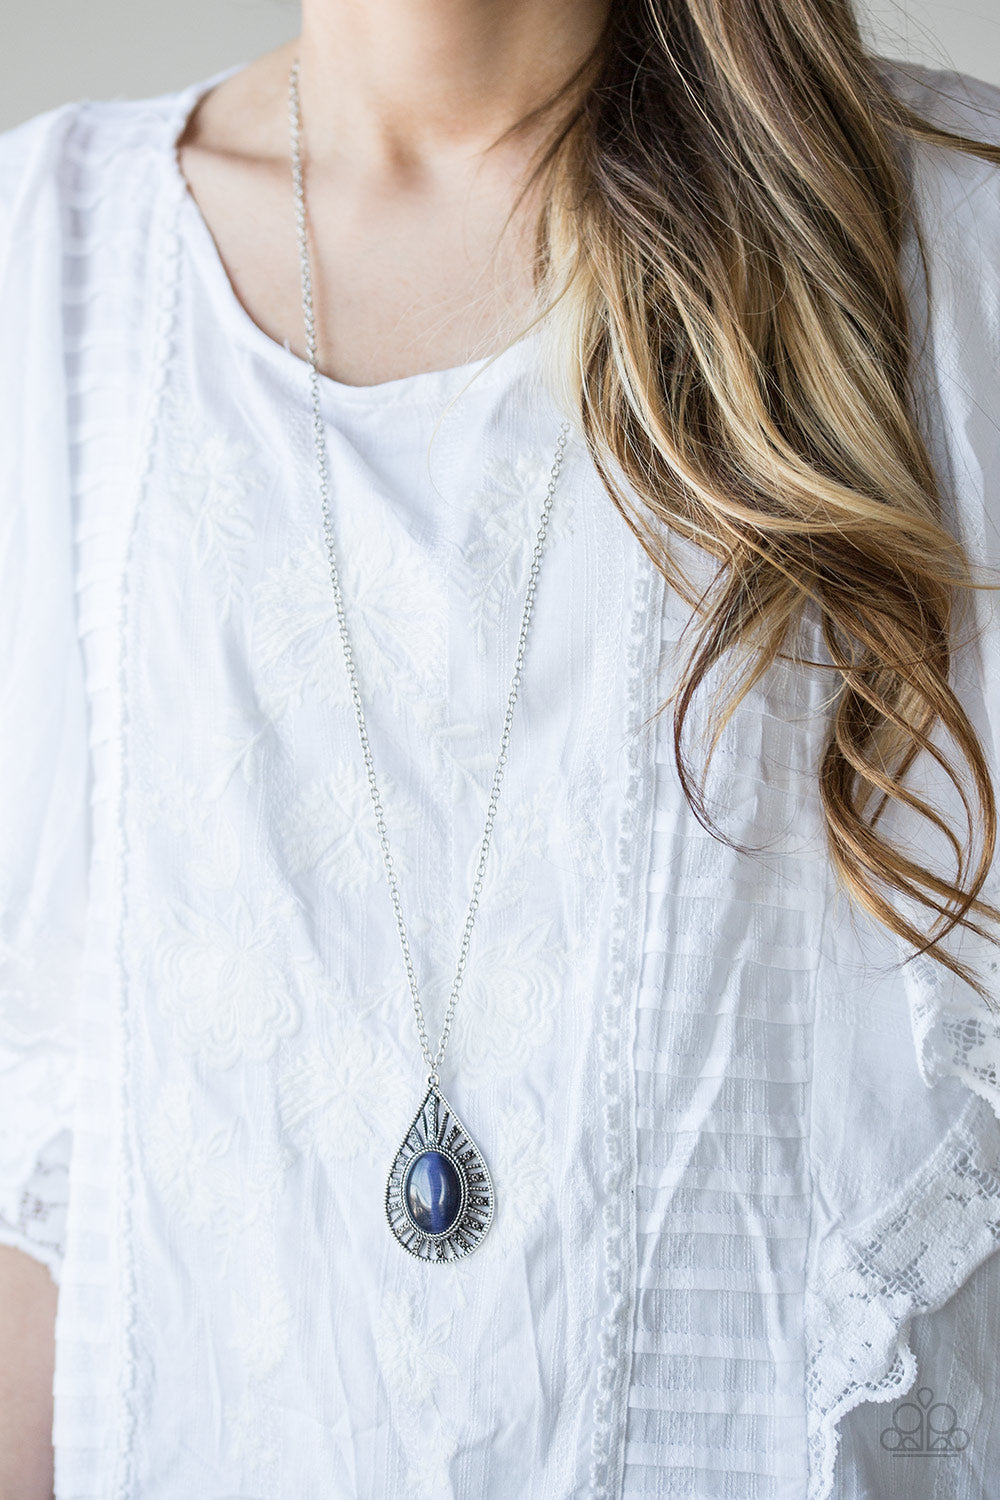 Total Tranquility - Blue - Classy Elite Jewelry